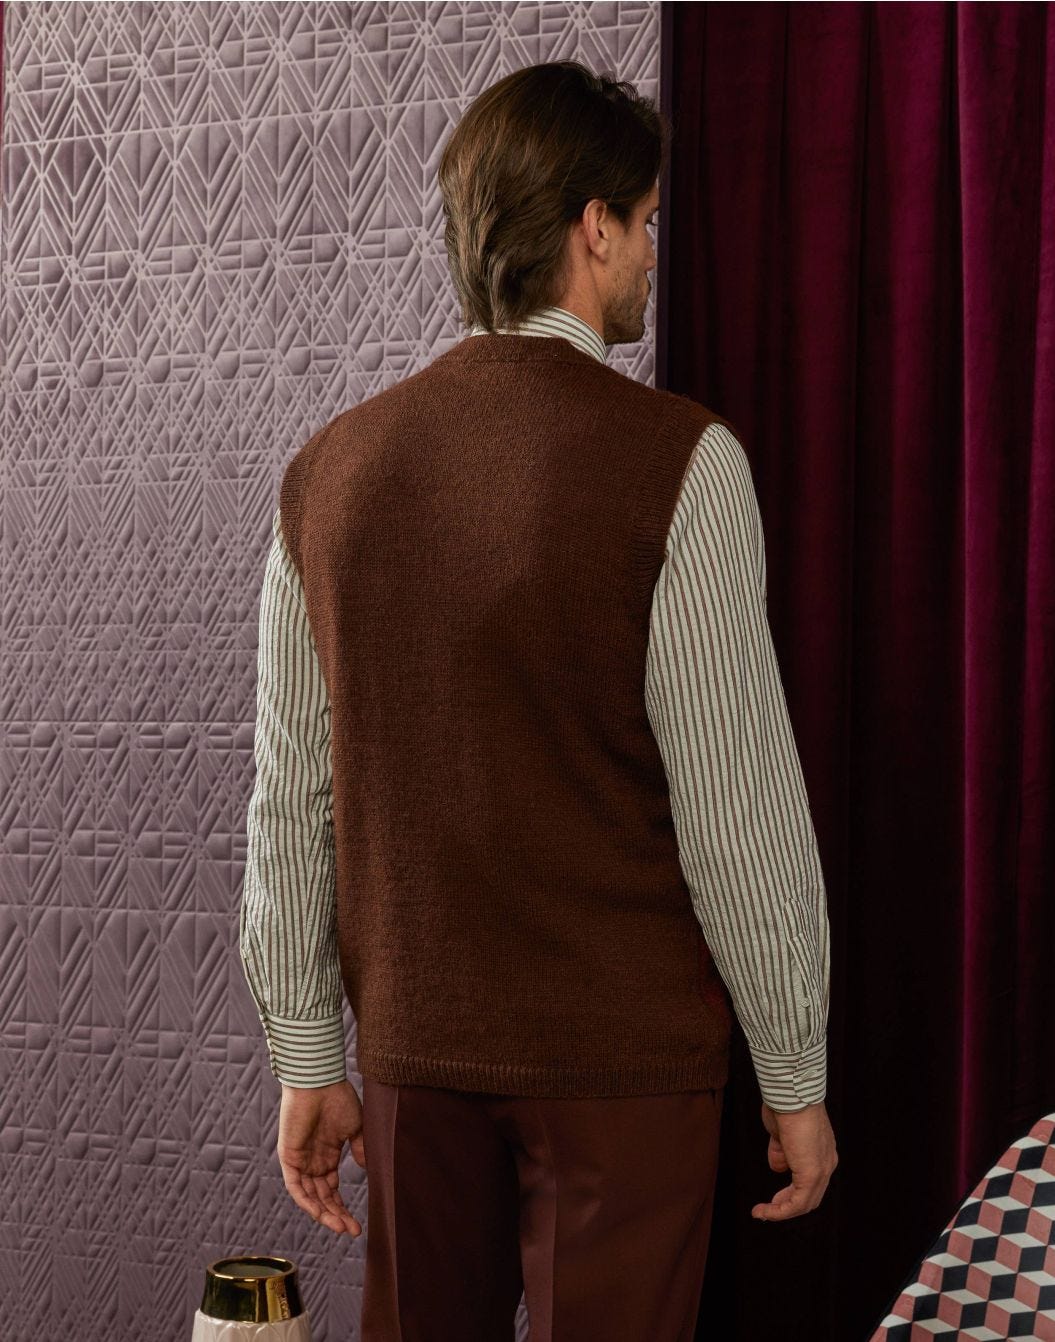 Waistcoat in a large red-and-brown jacquard fishbone pattern